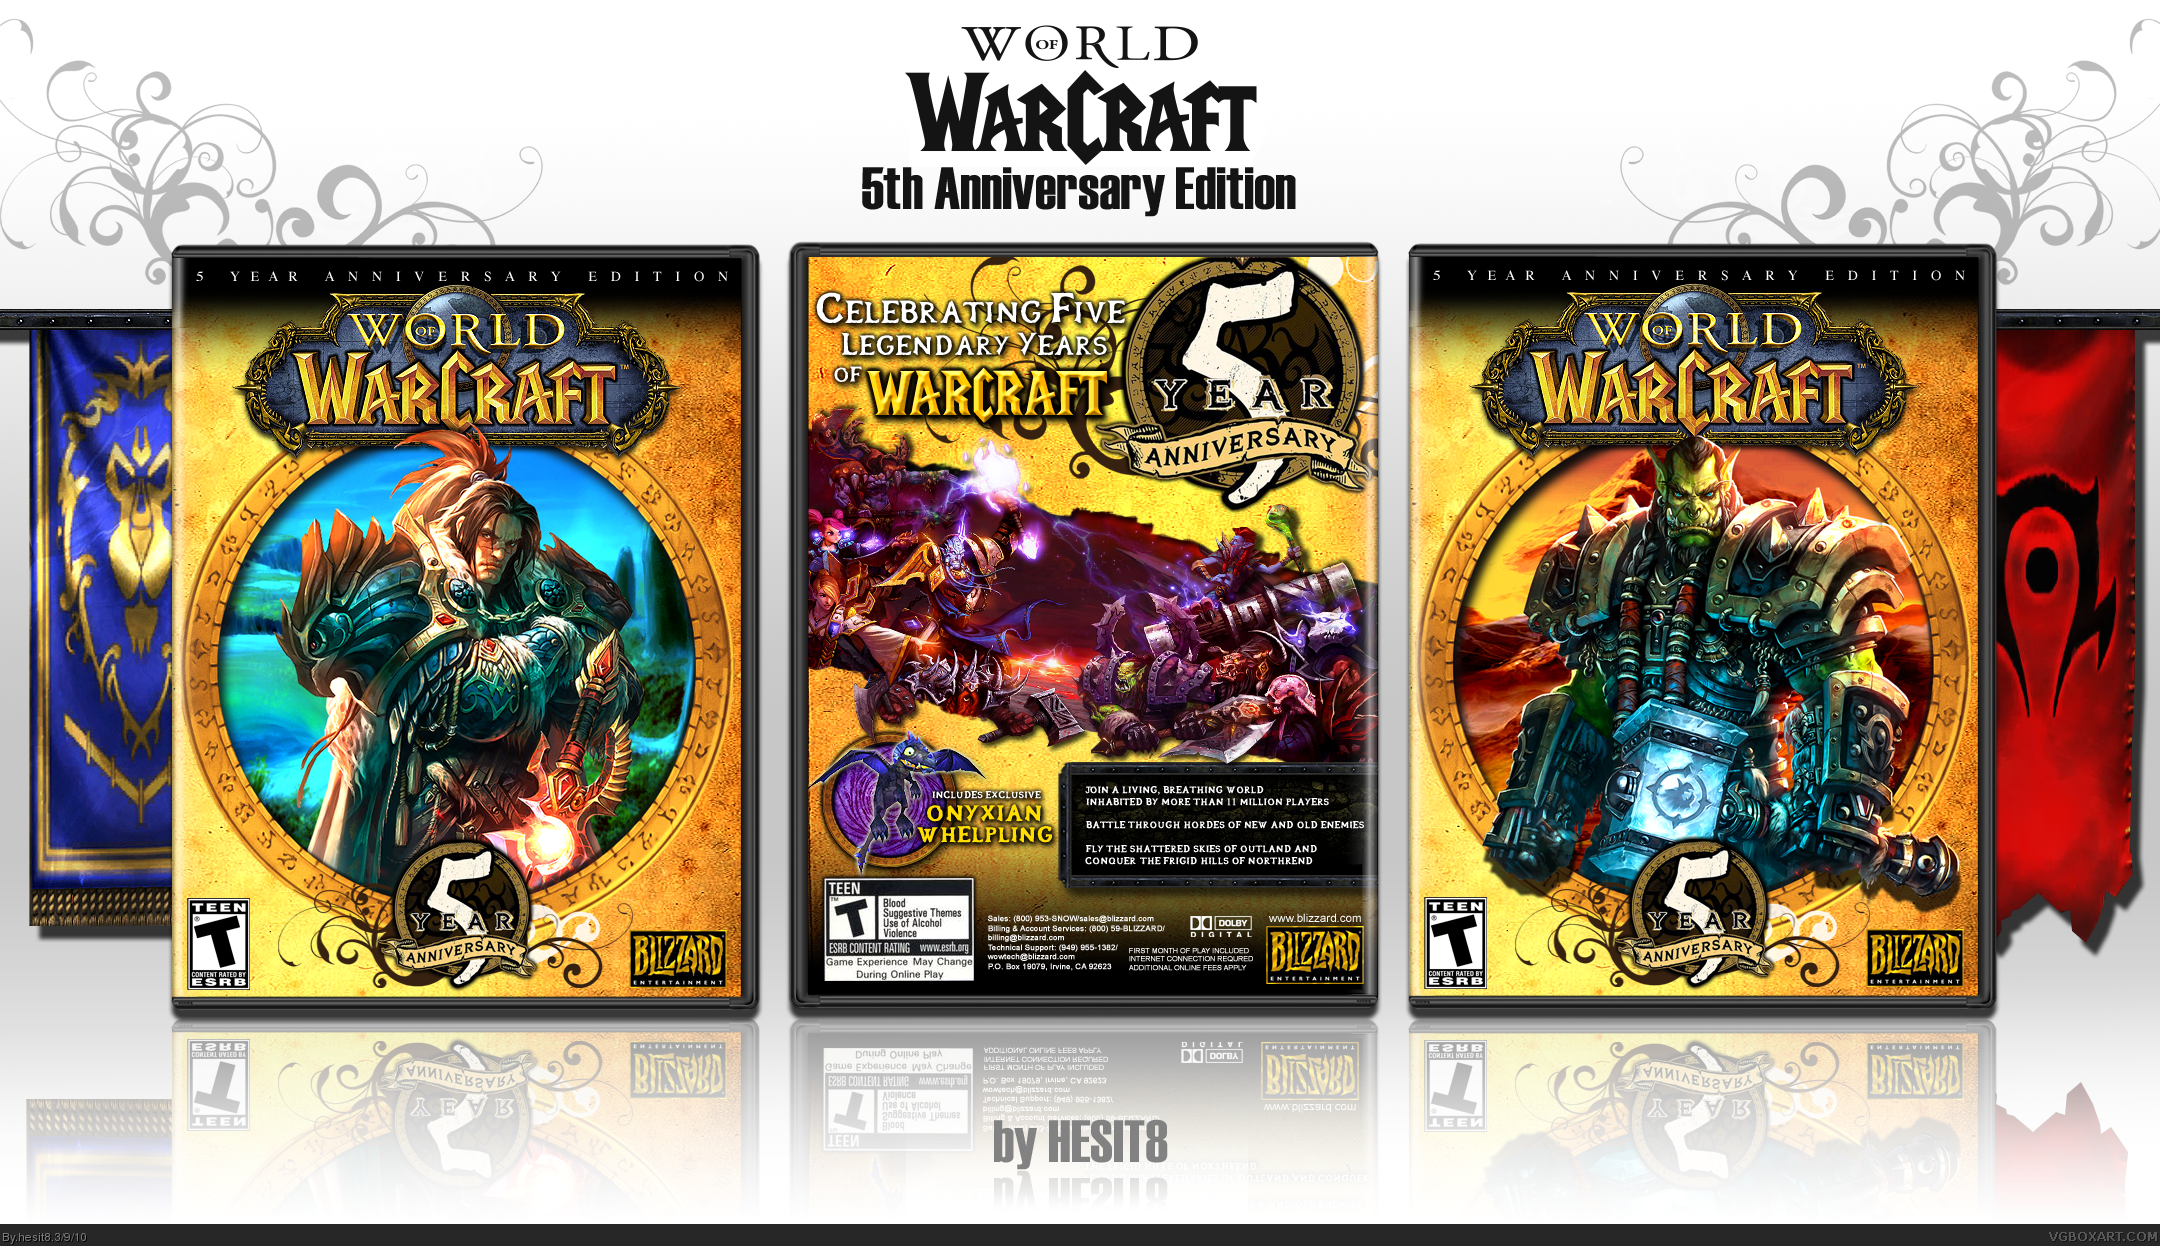 World of Warcraft: 5th Anniversary Edition box cover